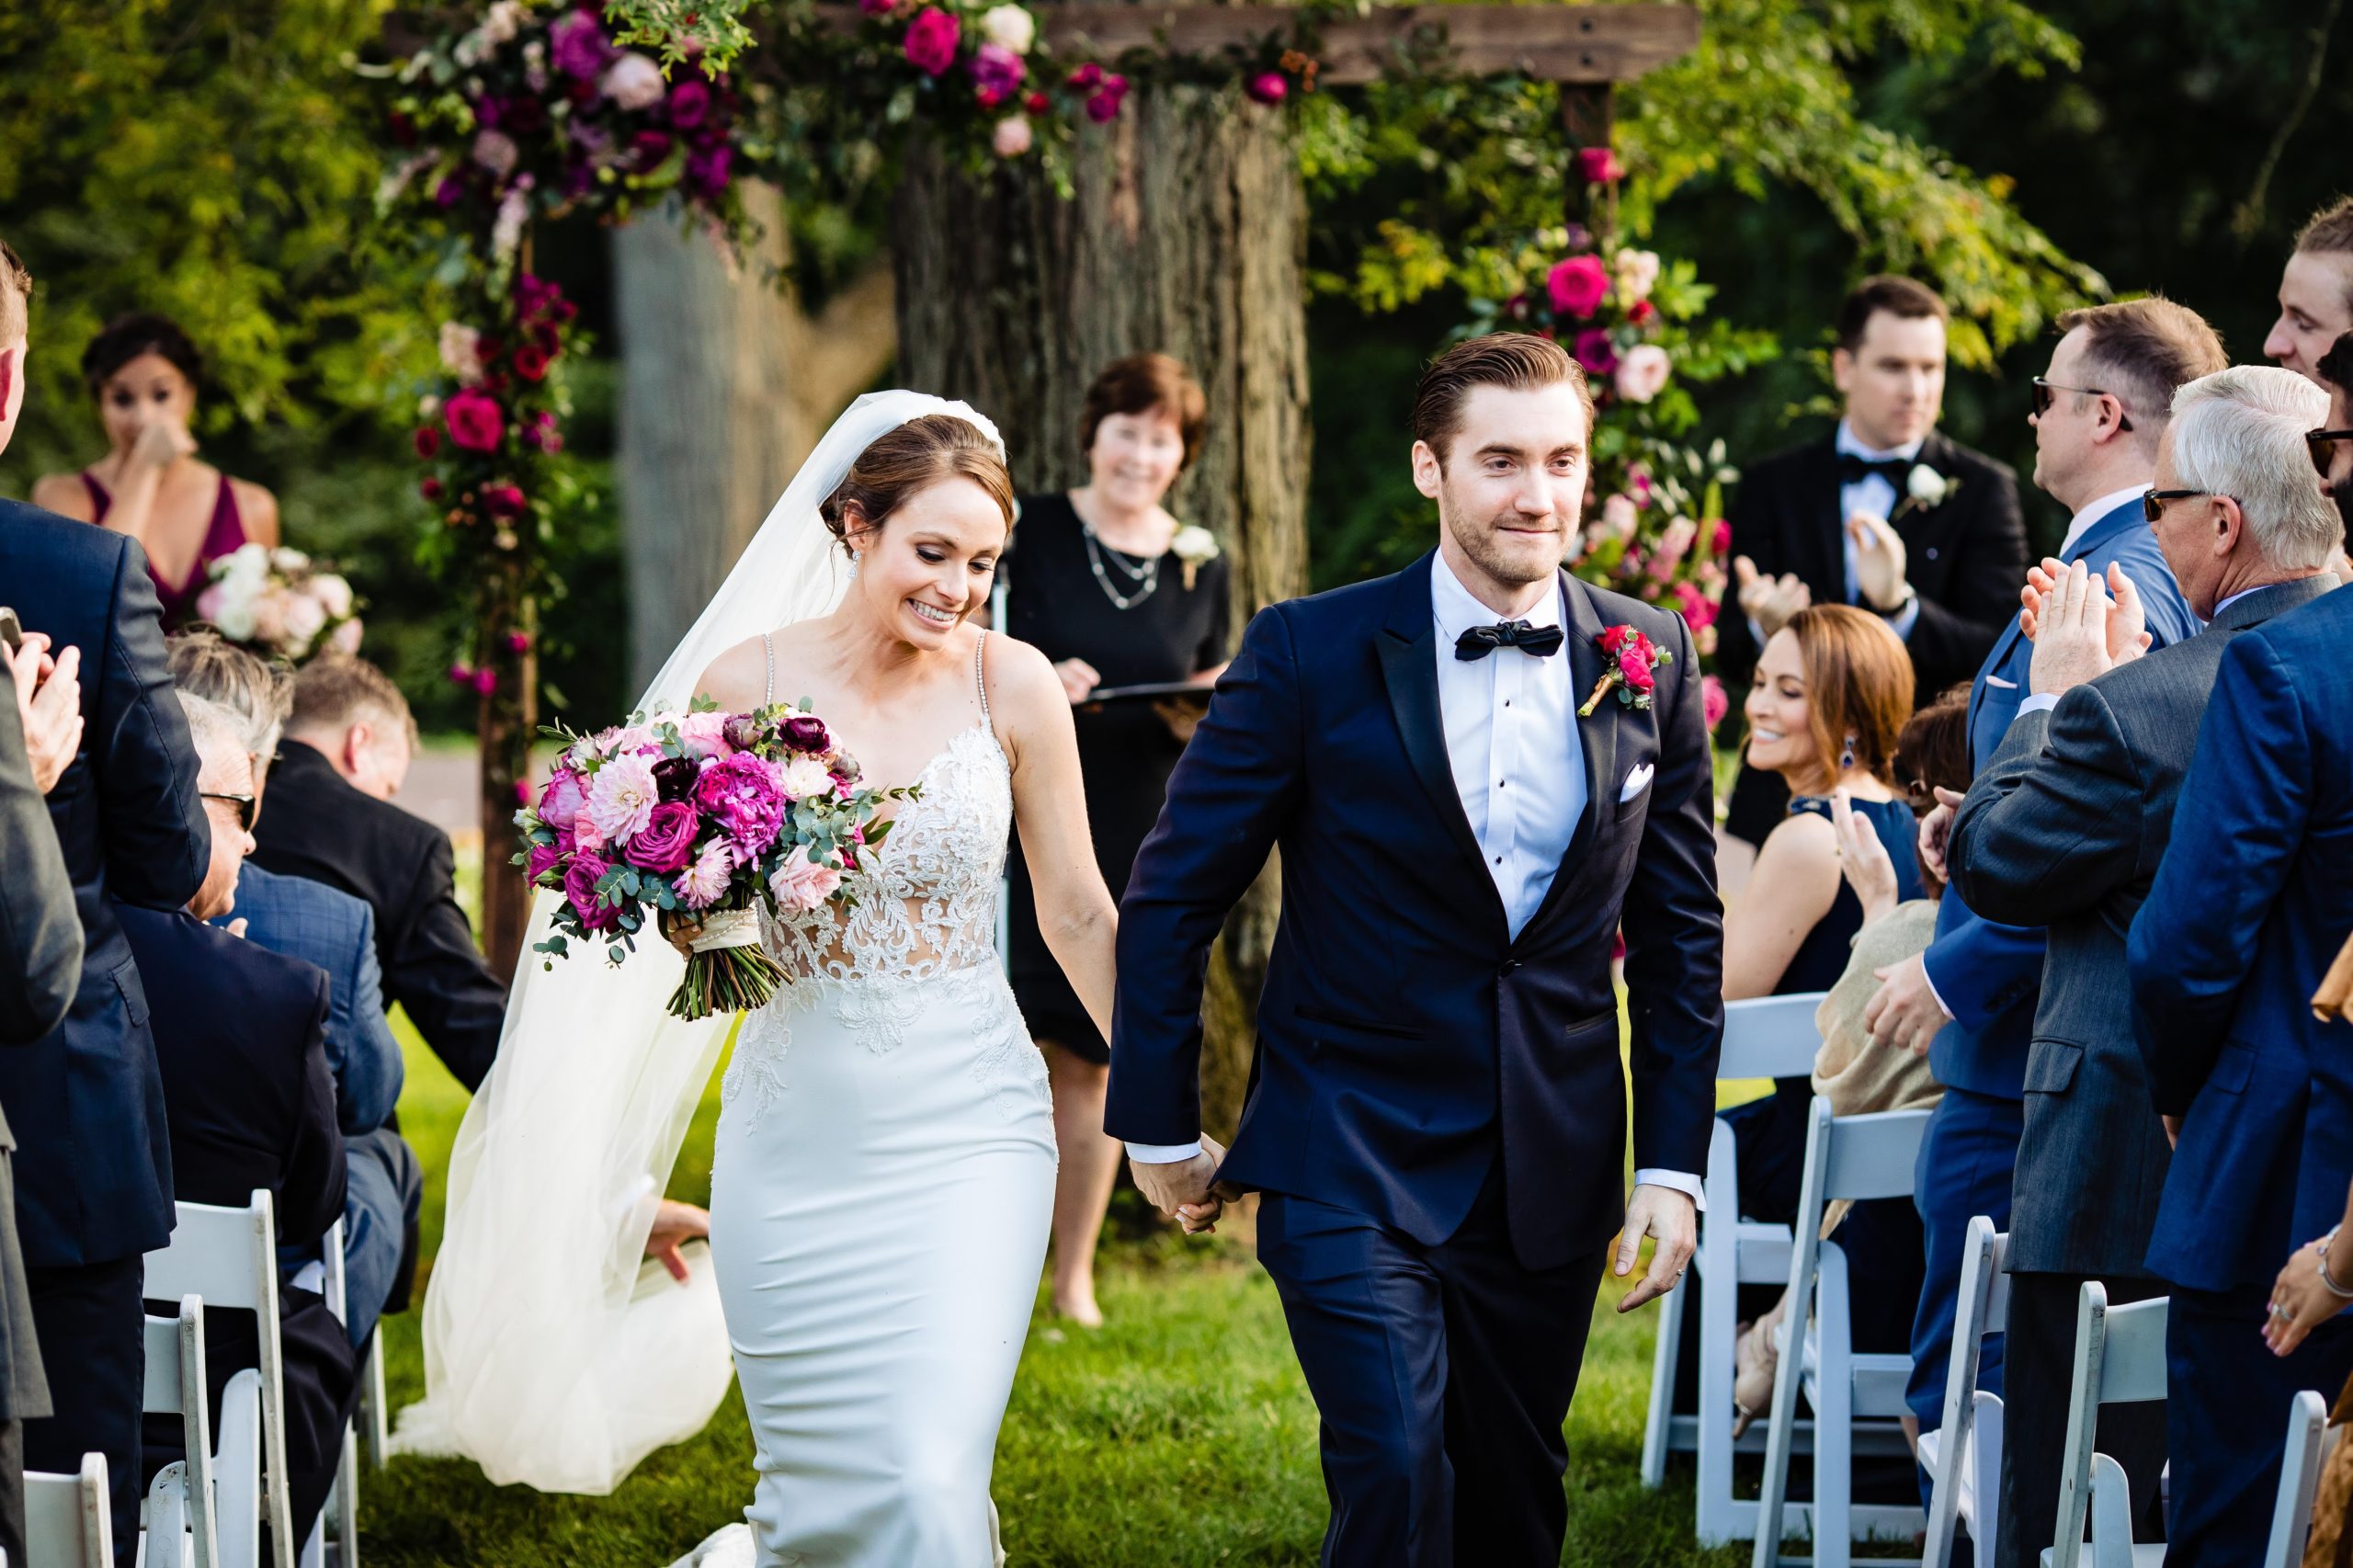 Fun Pink Garden wedding Ceremony at John James Audubon Center by Sebesta Design photographed by Morby Photography